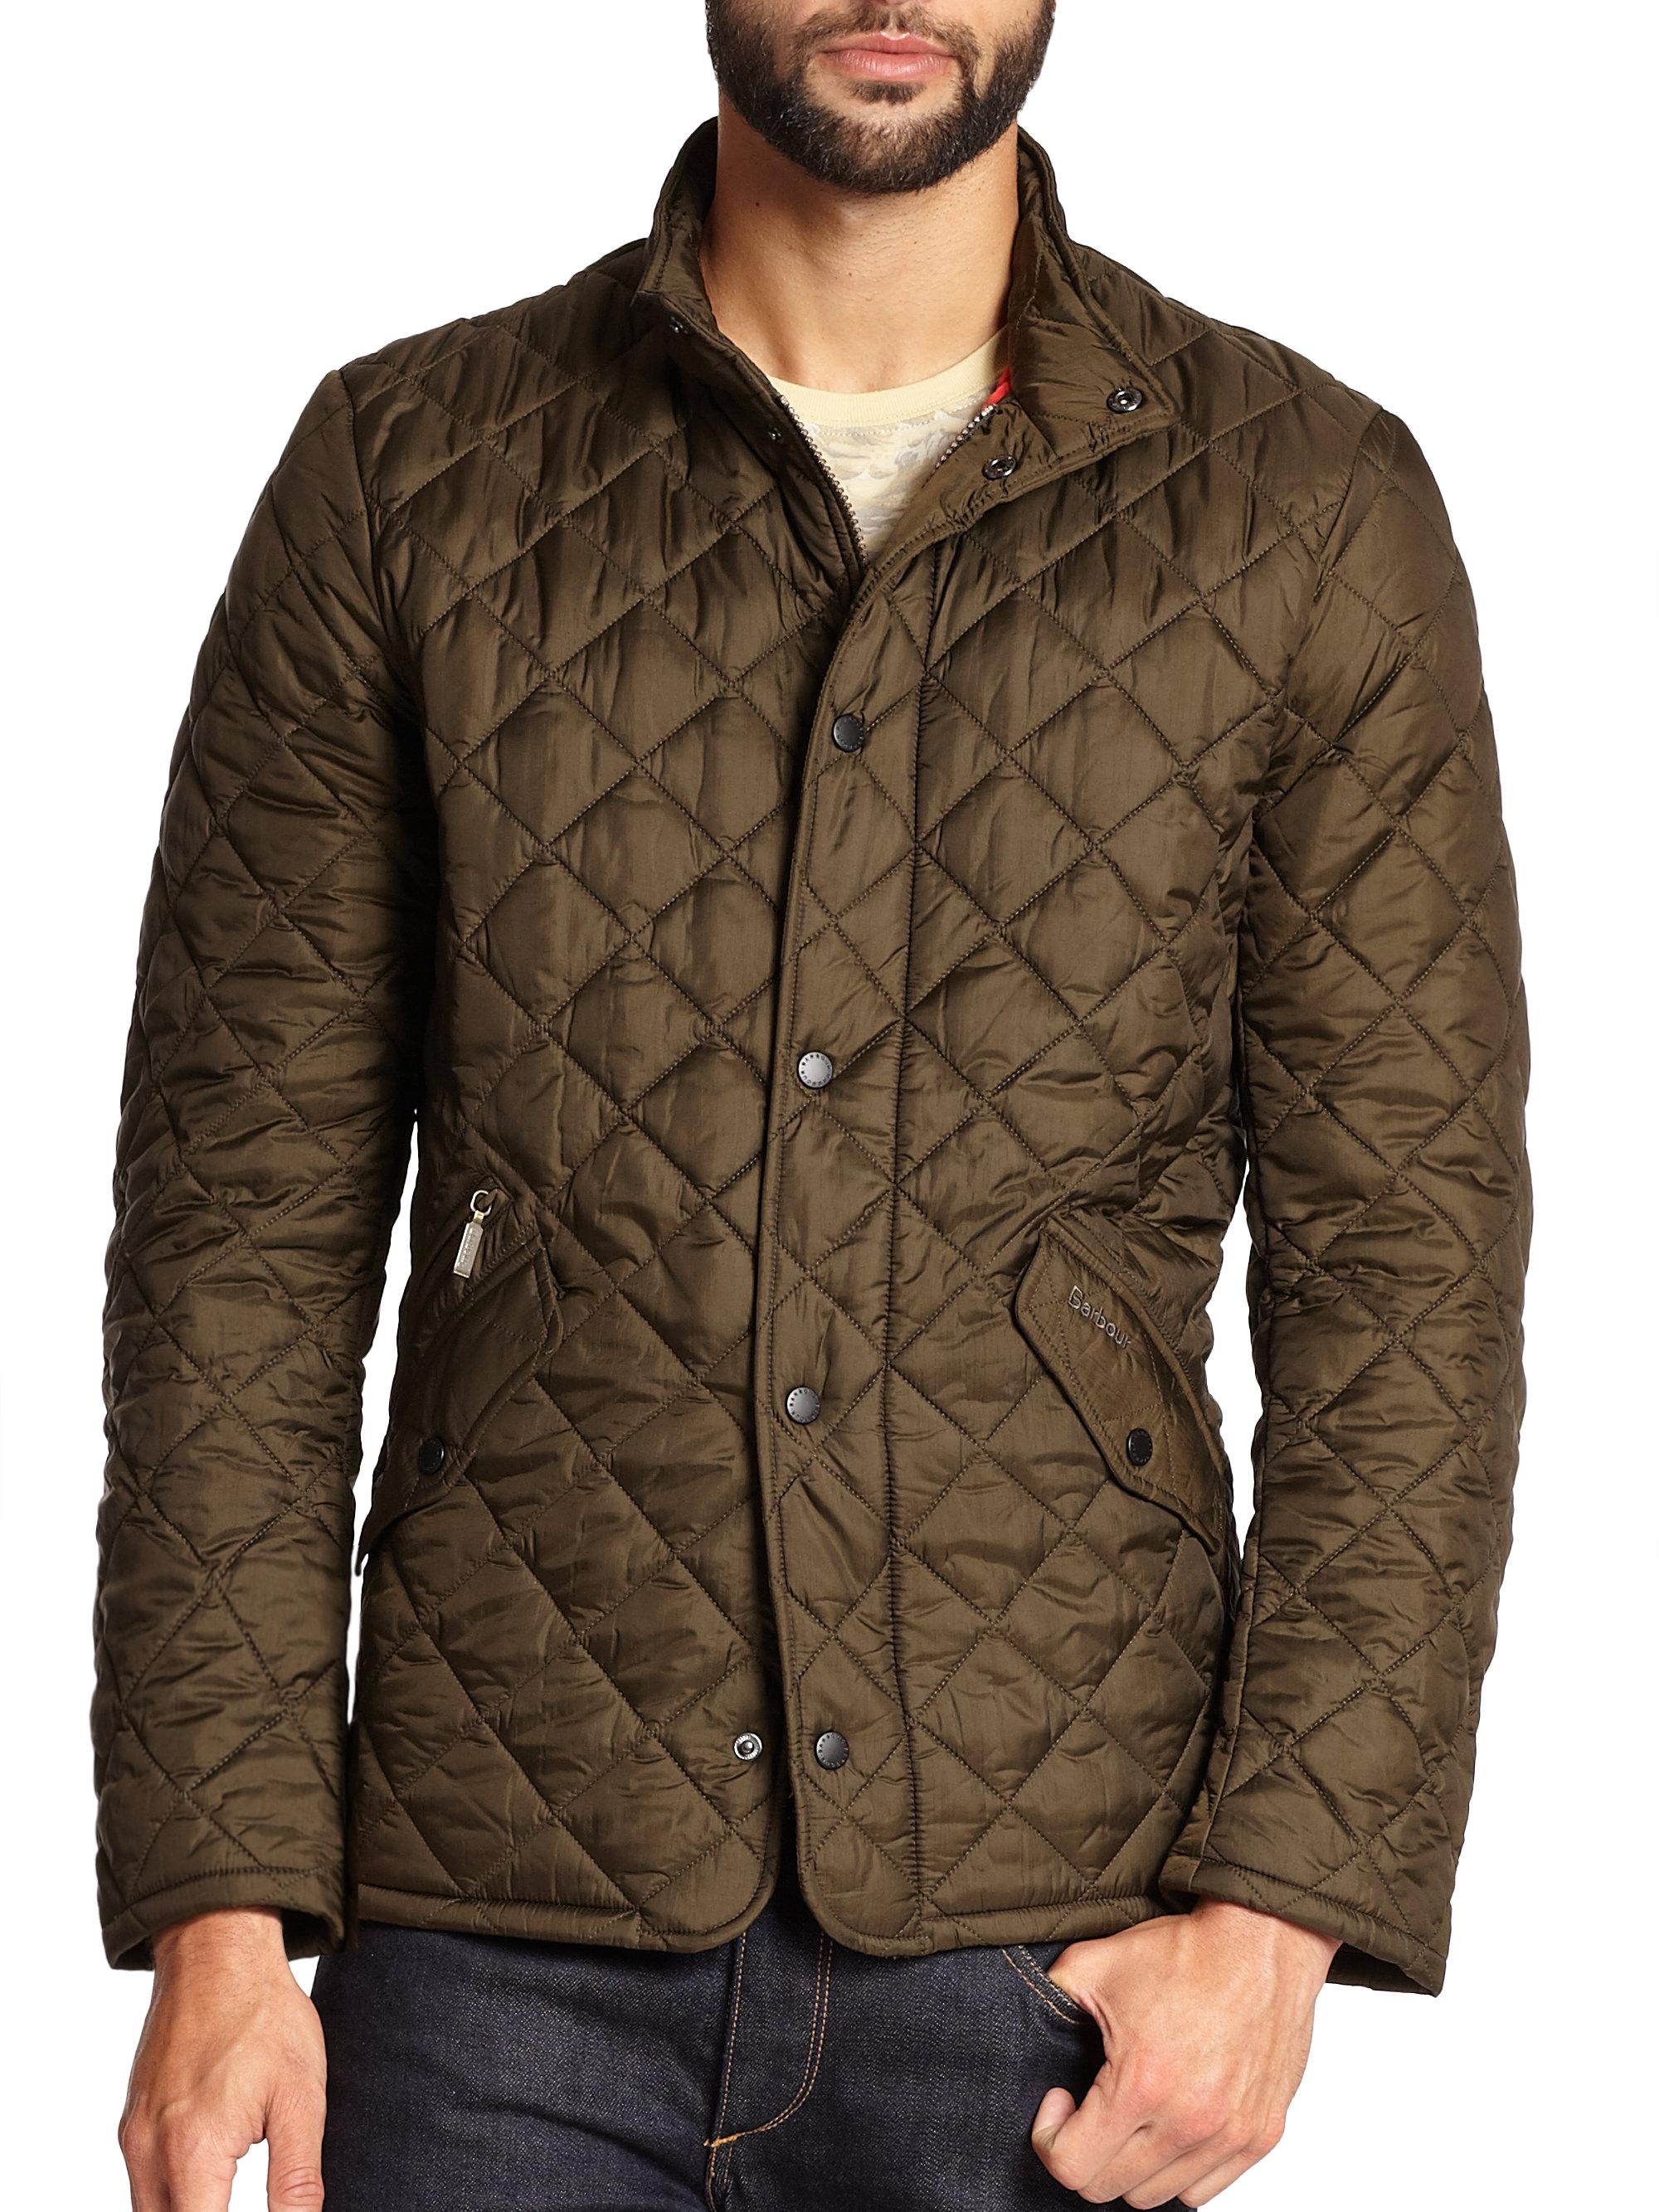 Lyst - Barbour Flyweight Quilted Jacket in Green for Men